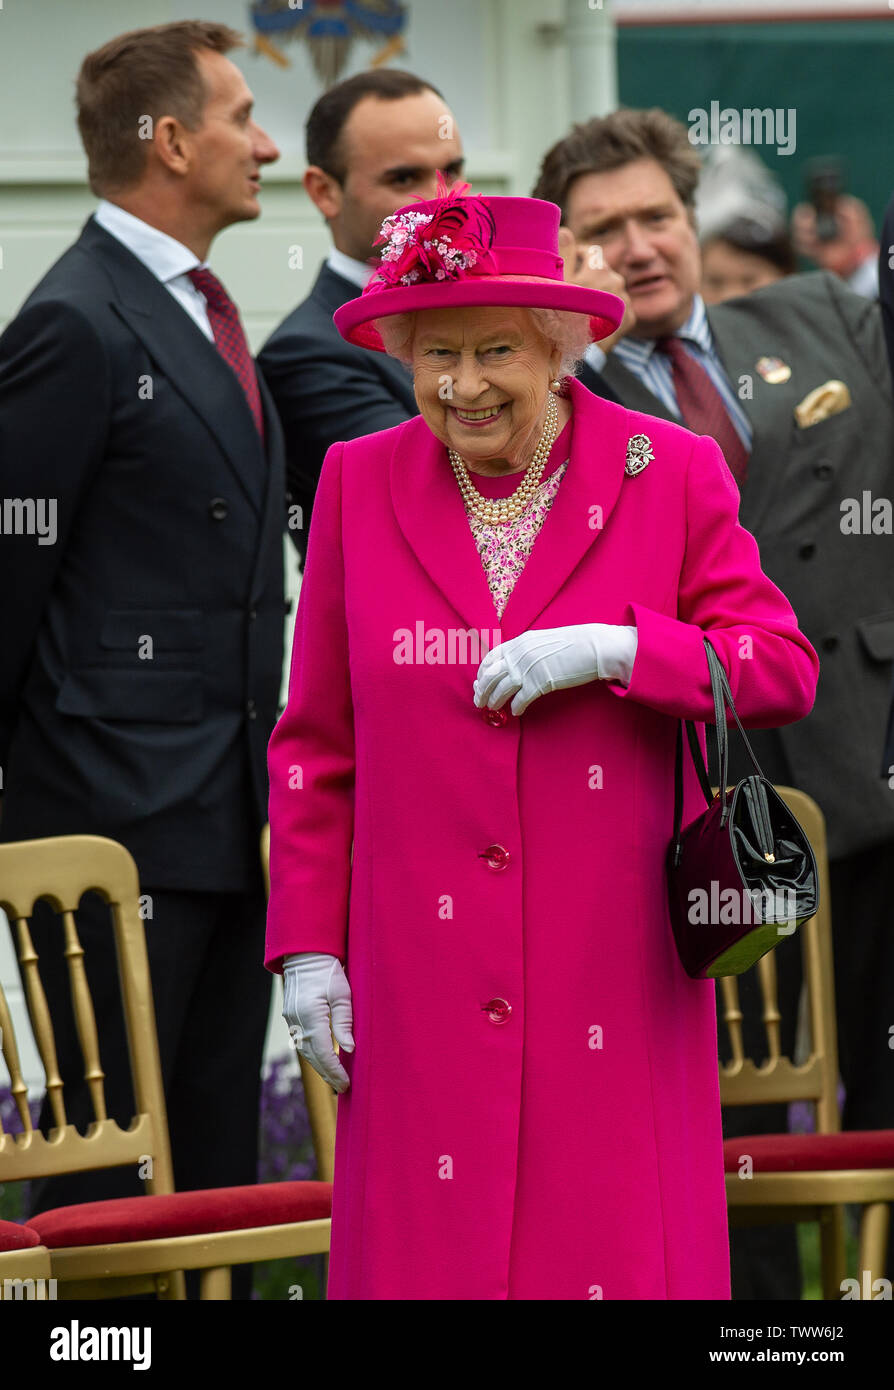 Windsor Great Park, Egham, Surrey, UK. 23rd June 2019. Her Majesty the Queen looks radiant in a bright pink shift coat and hat after posing for a photo with the Board of Directors of  Guards Polo Club. Credit: Maureen McLean/Alamy Live News Stock Photo